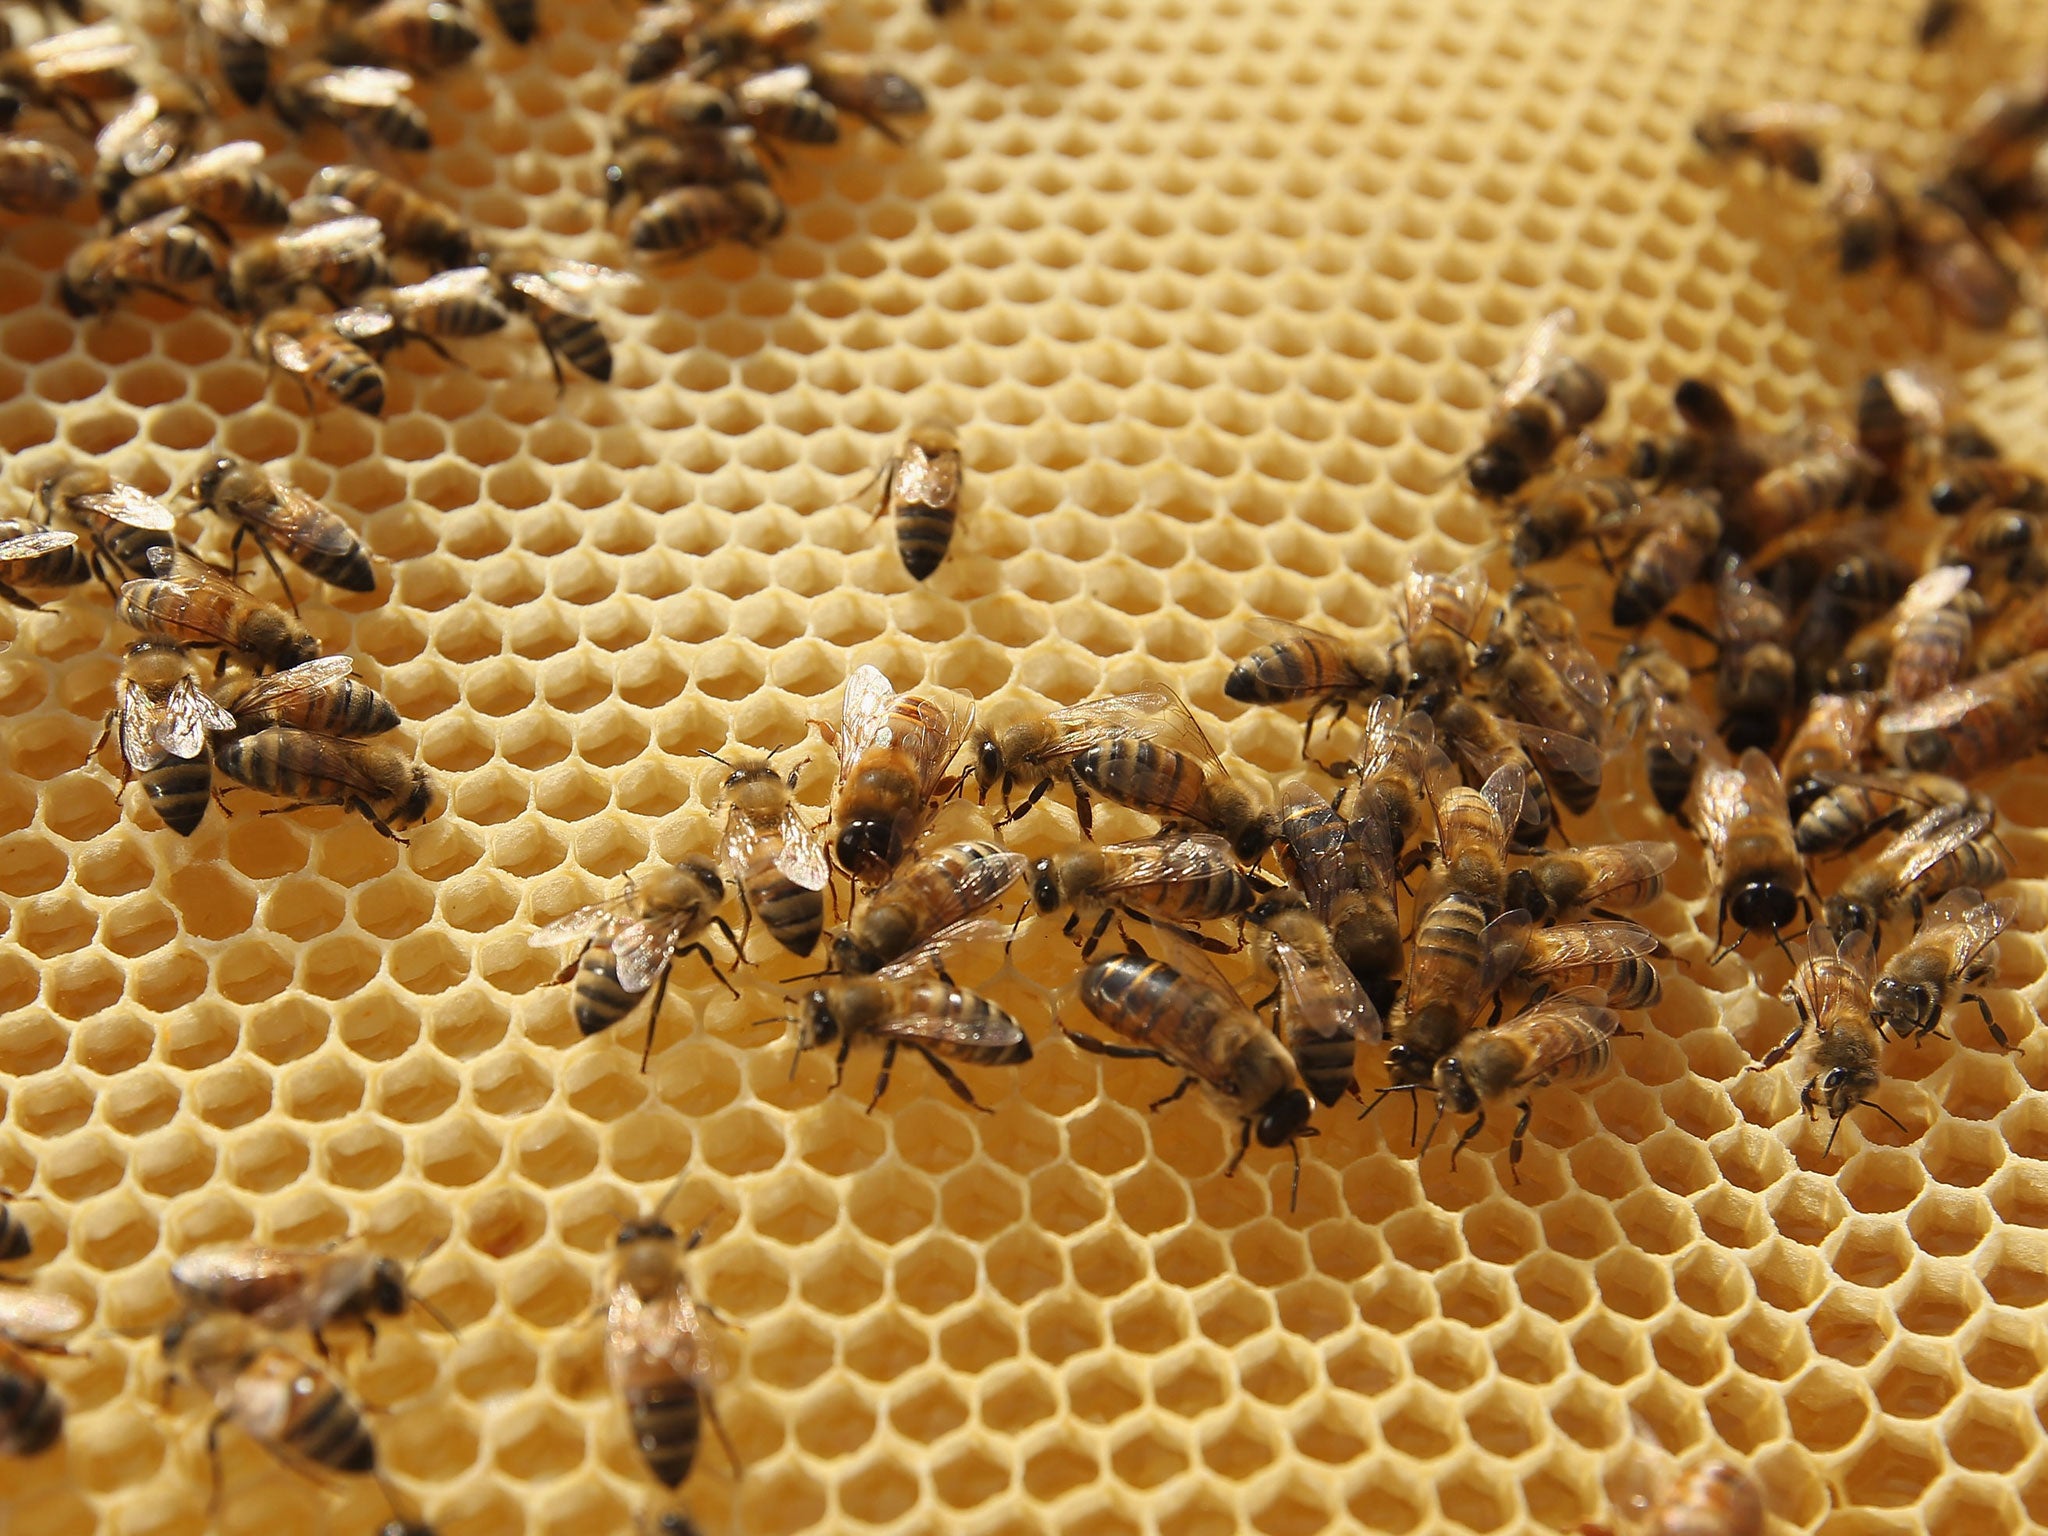 A colony of bees can be sold for around £500 on the black market